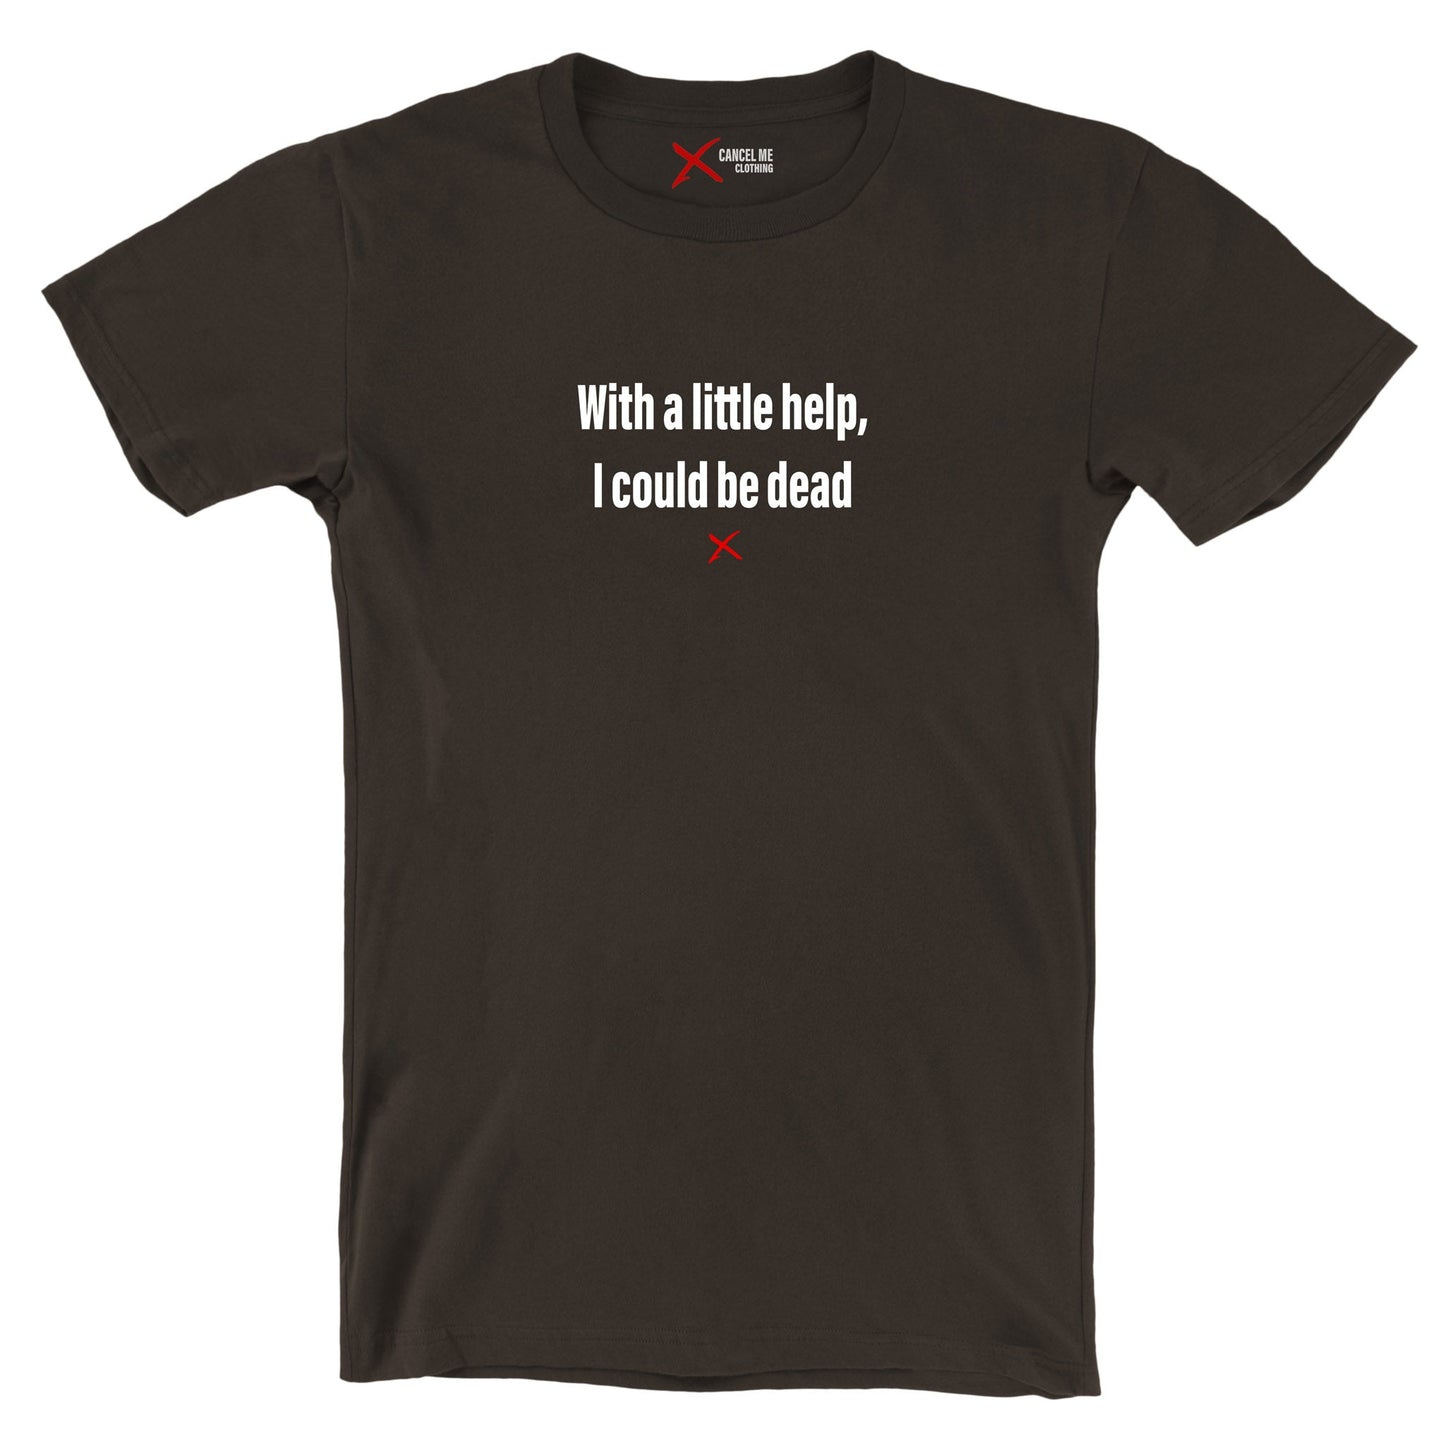 With a little help, I could be dead - Shirt